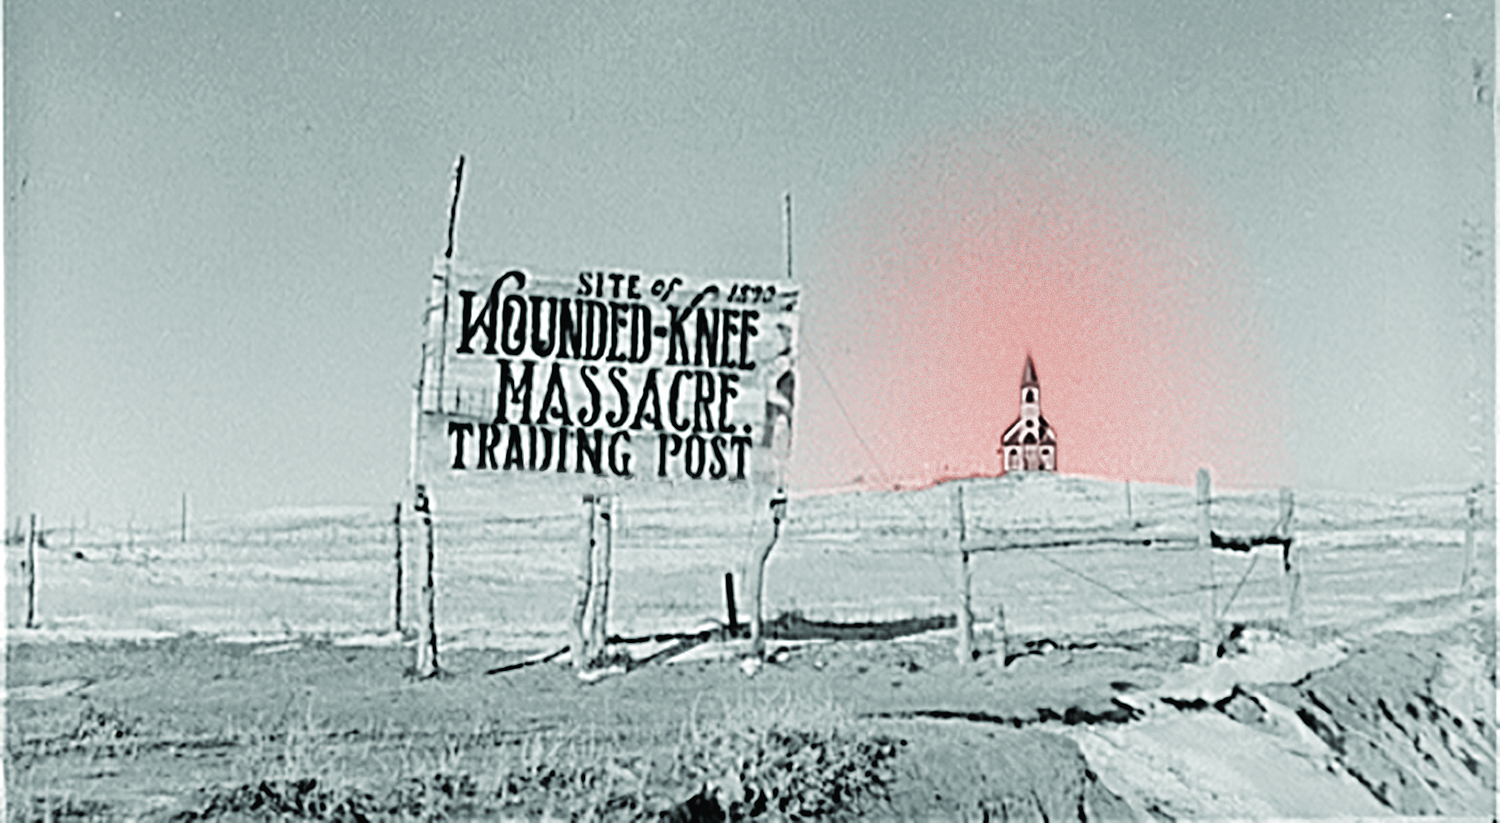 A Church in the Distance of a Wounded Knee Massacre Sign